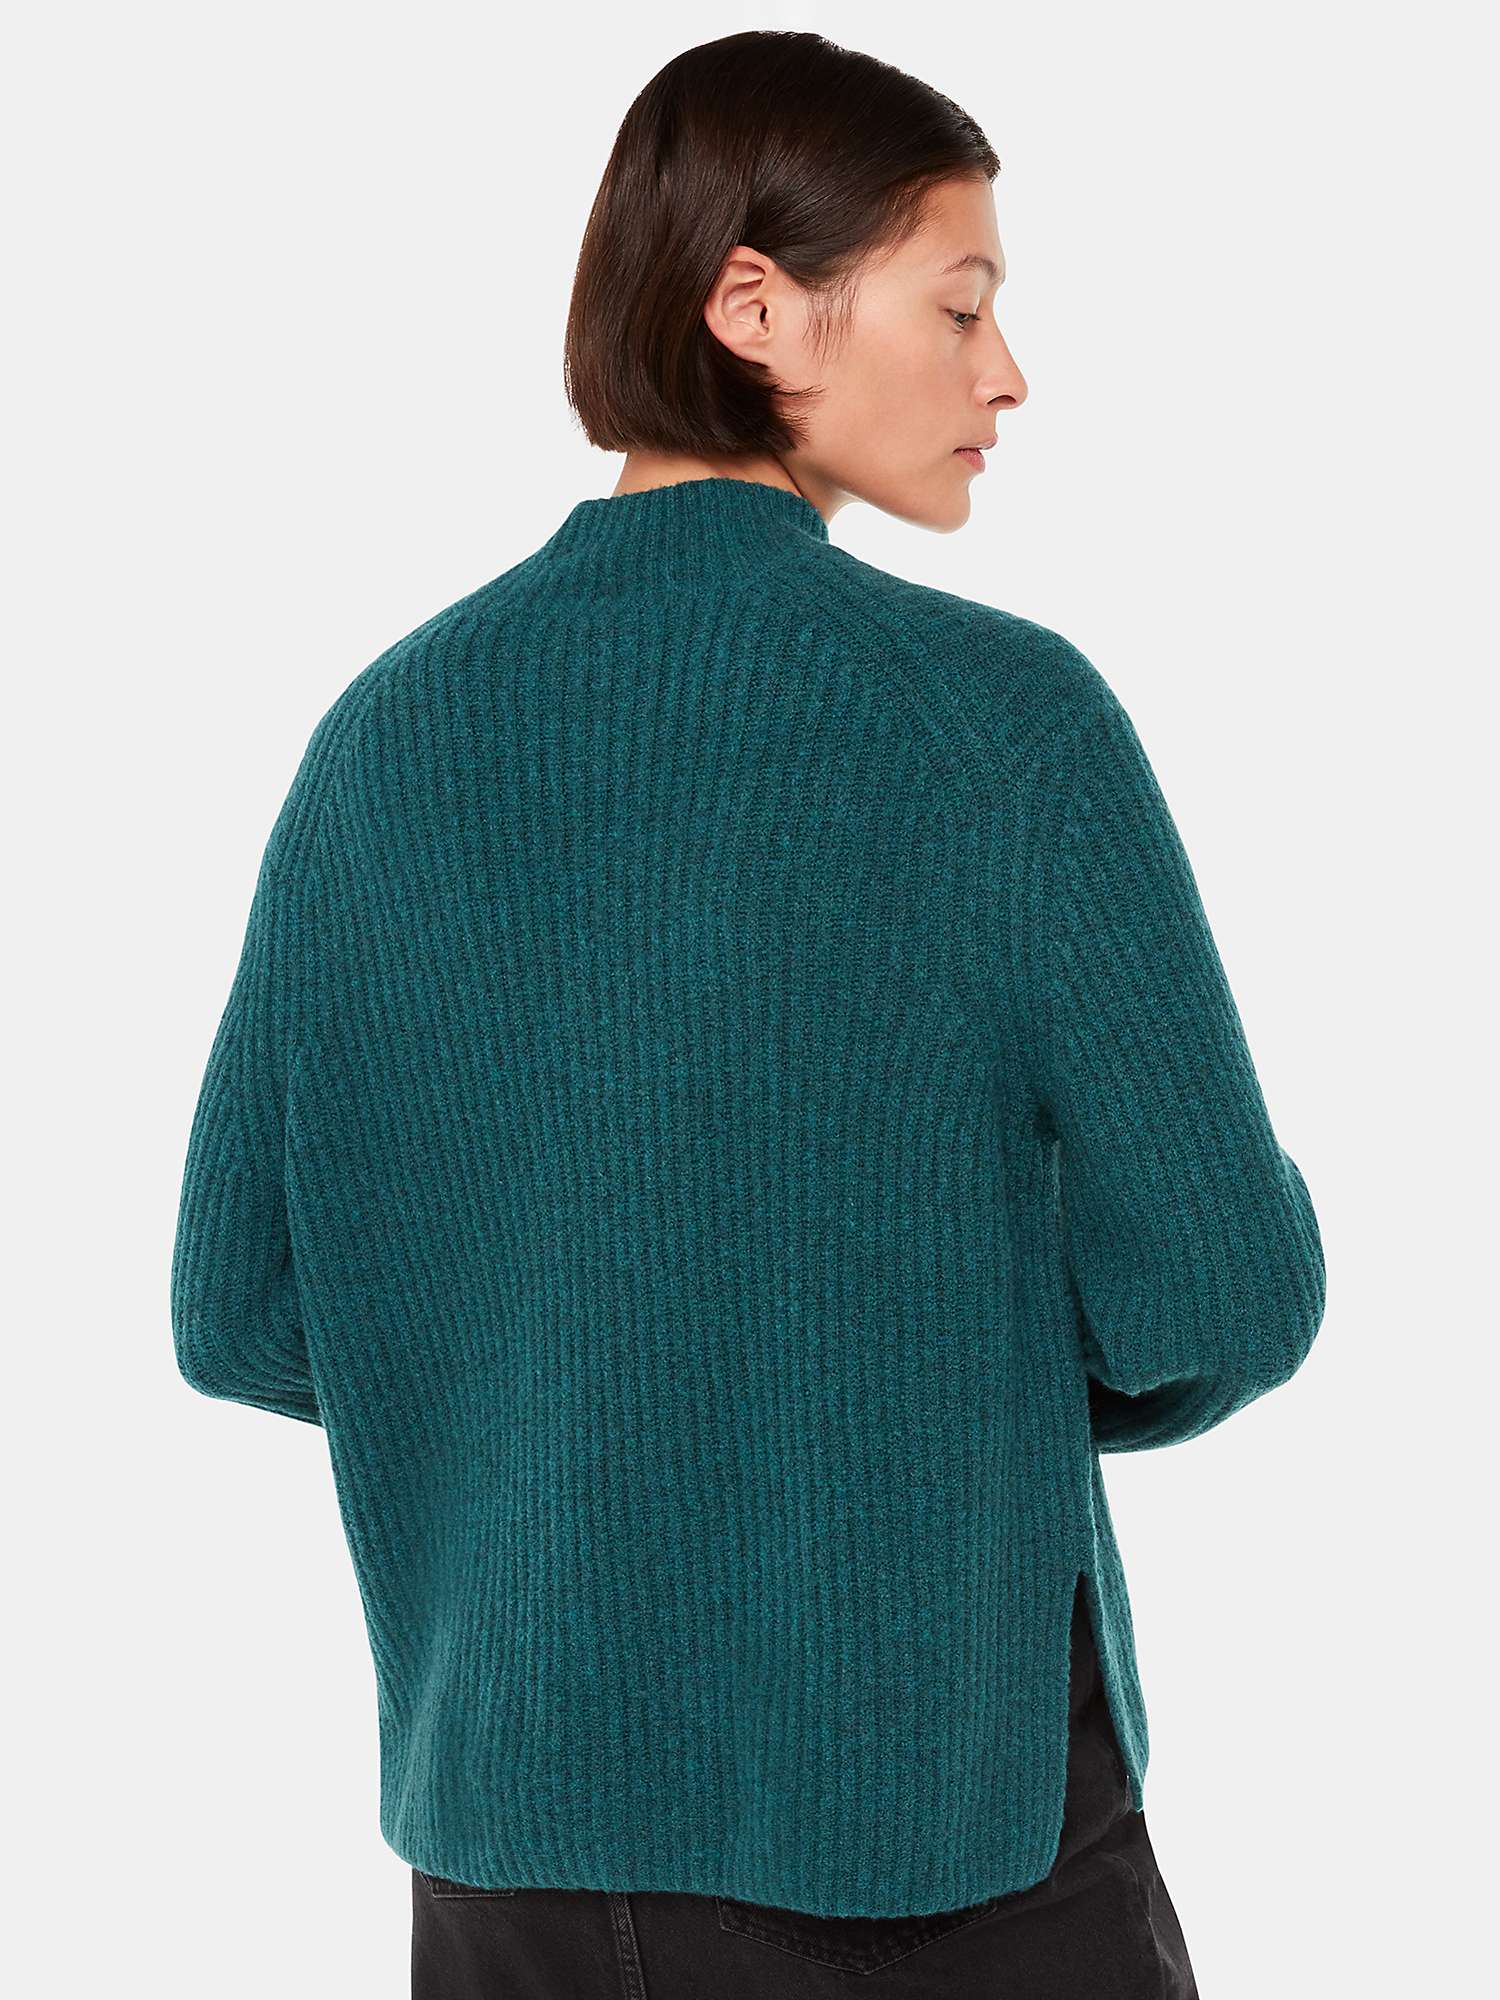 Buy Whistles Wool Mix Ribbed Funnel Neck Jumper Online at johnlewis.com